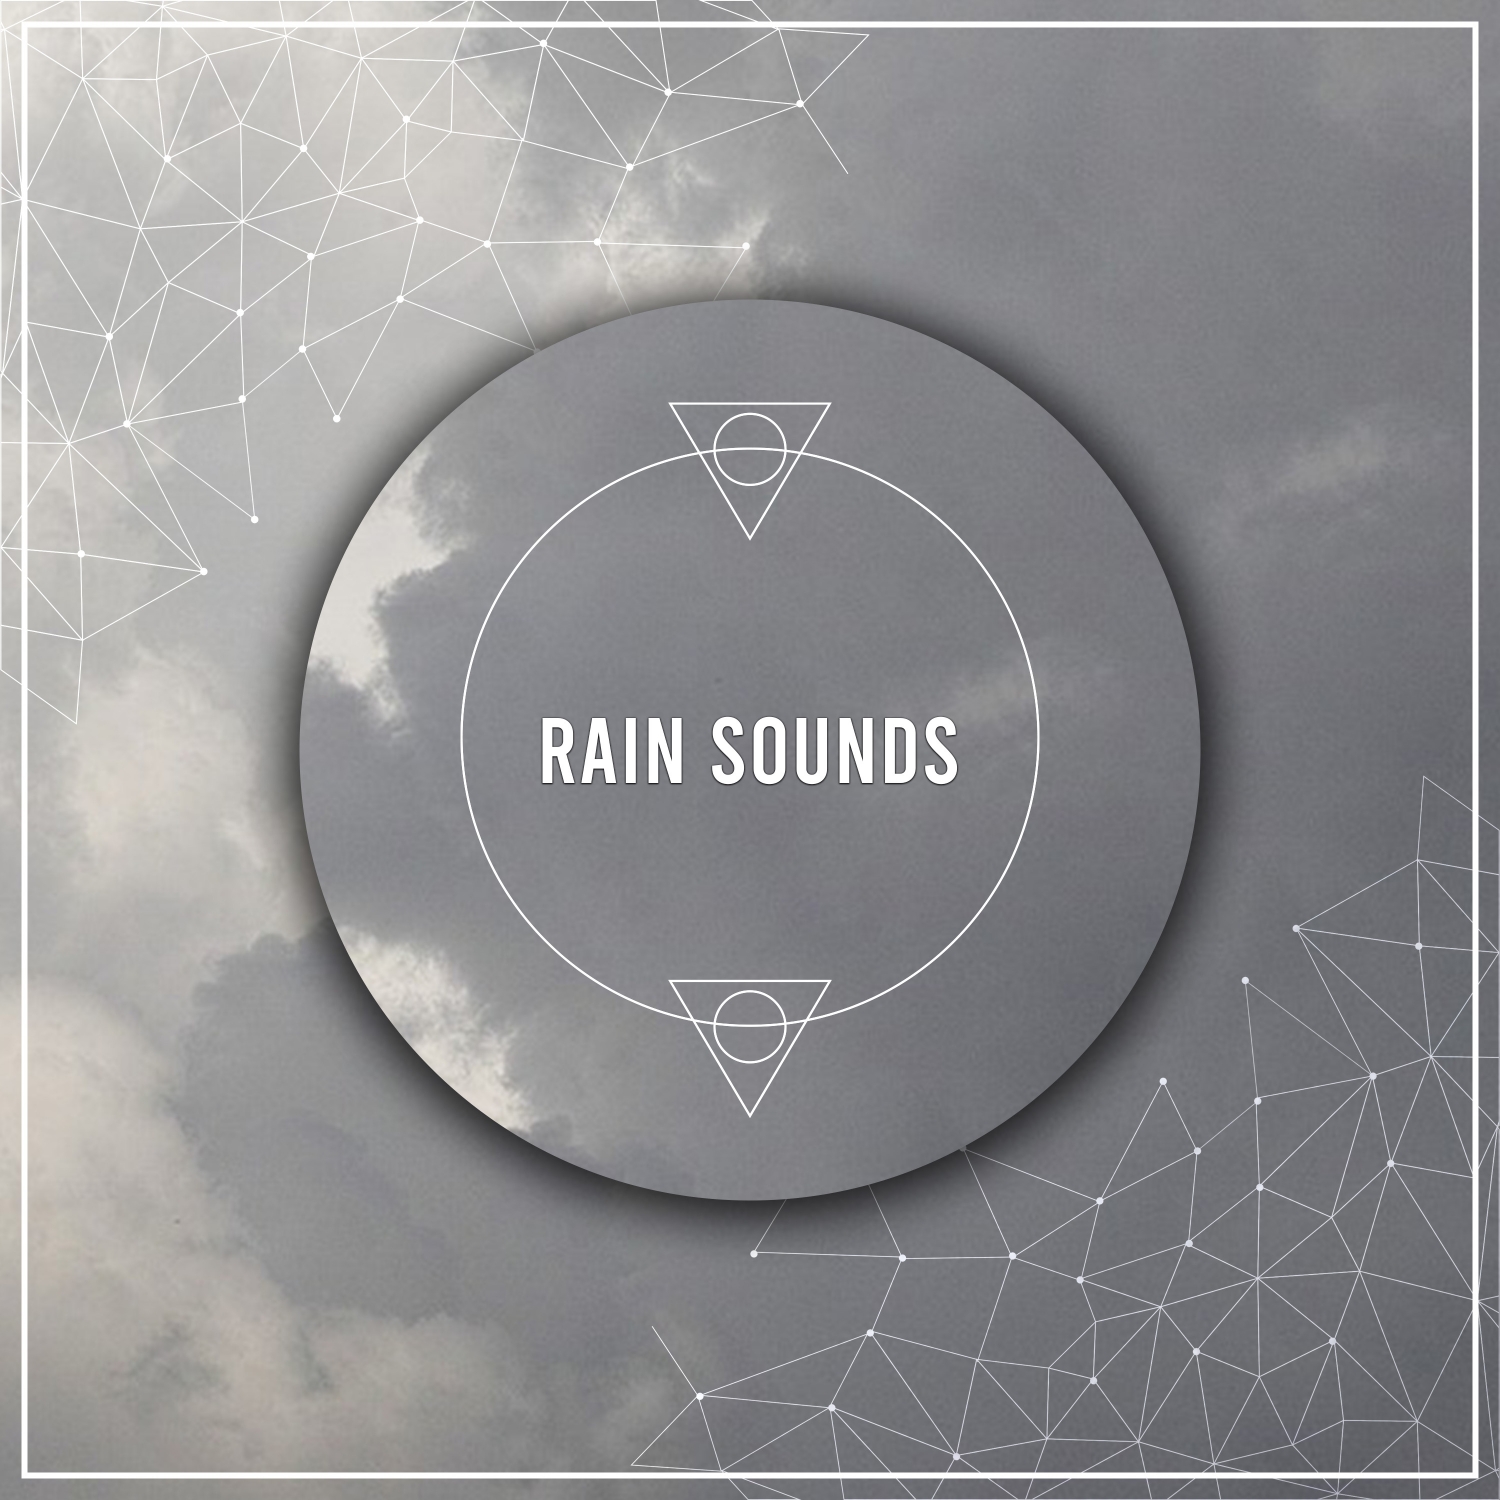 19 Rain Sounds - Heavy Rain and Thunderstorms for White Noise